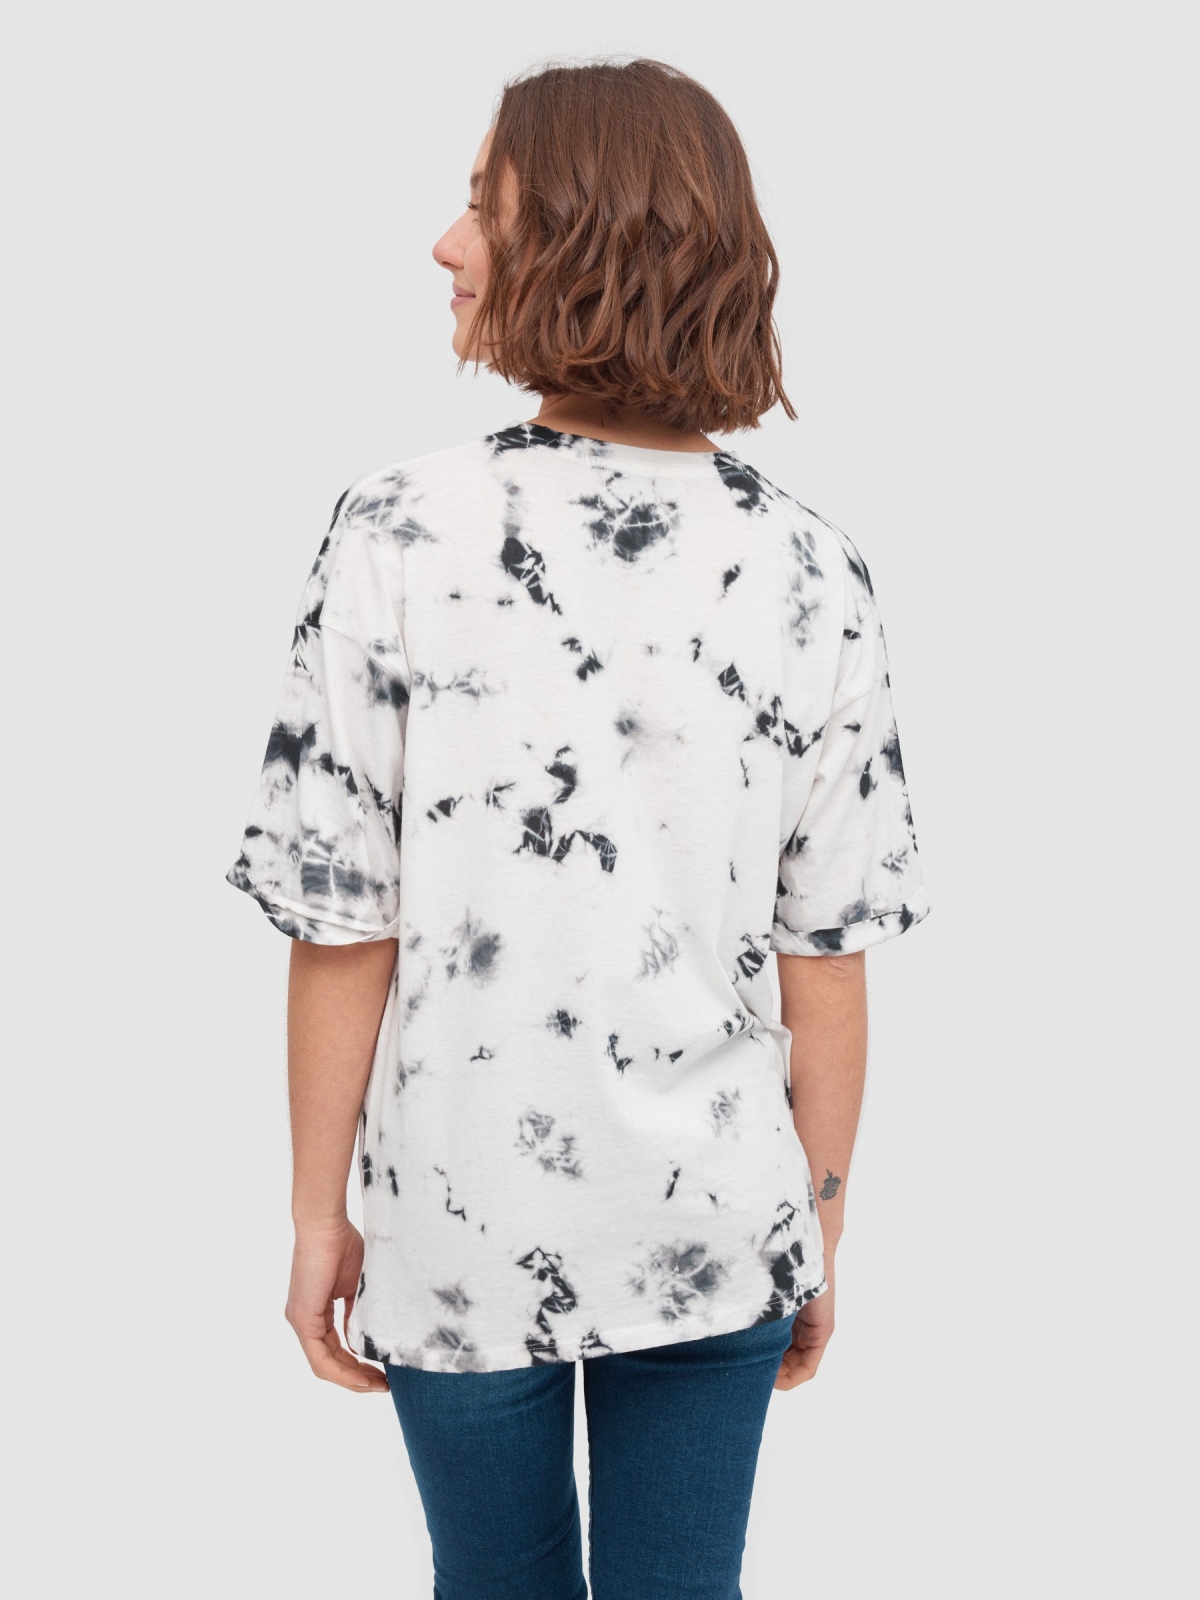 Tie-dye oversize t-shirt black middle back view